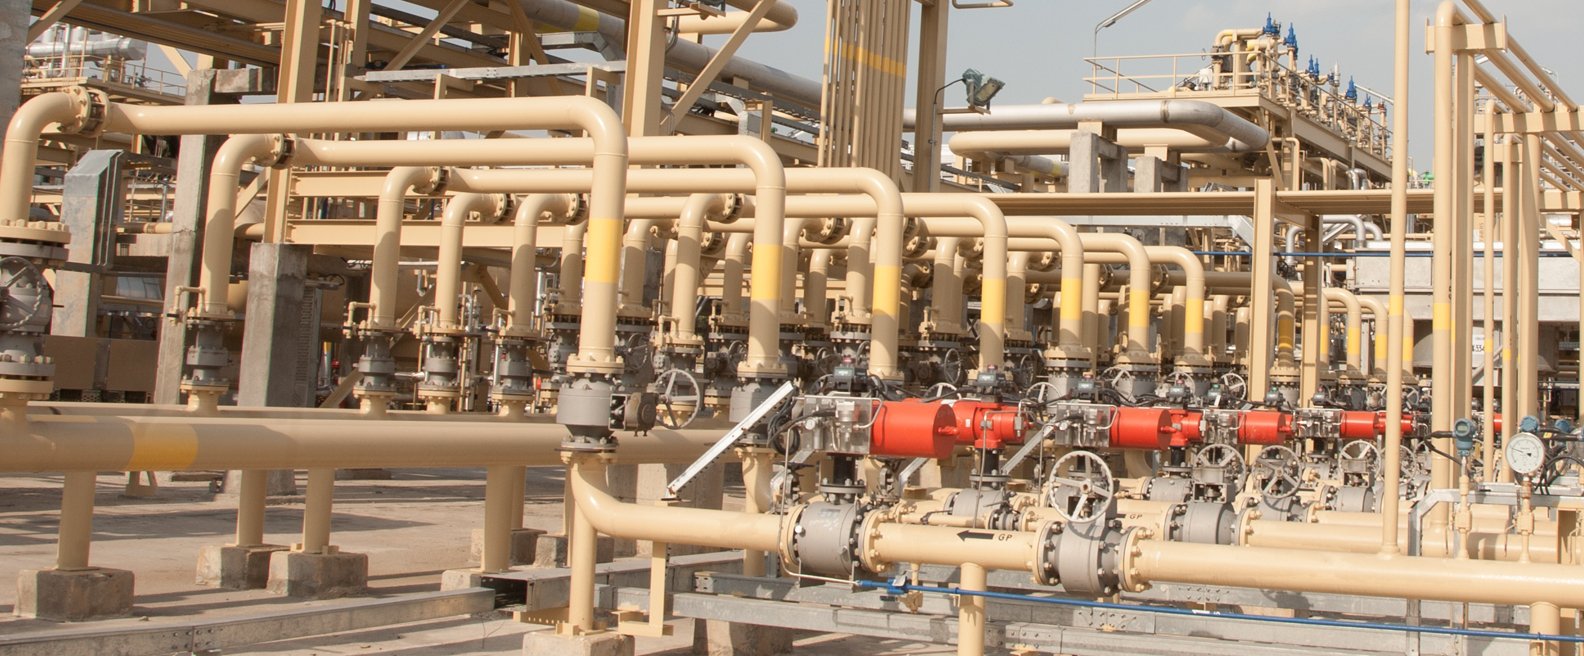 Gas gathering manifolds at LPG/ NGL Plant Plant-III Adhi Field